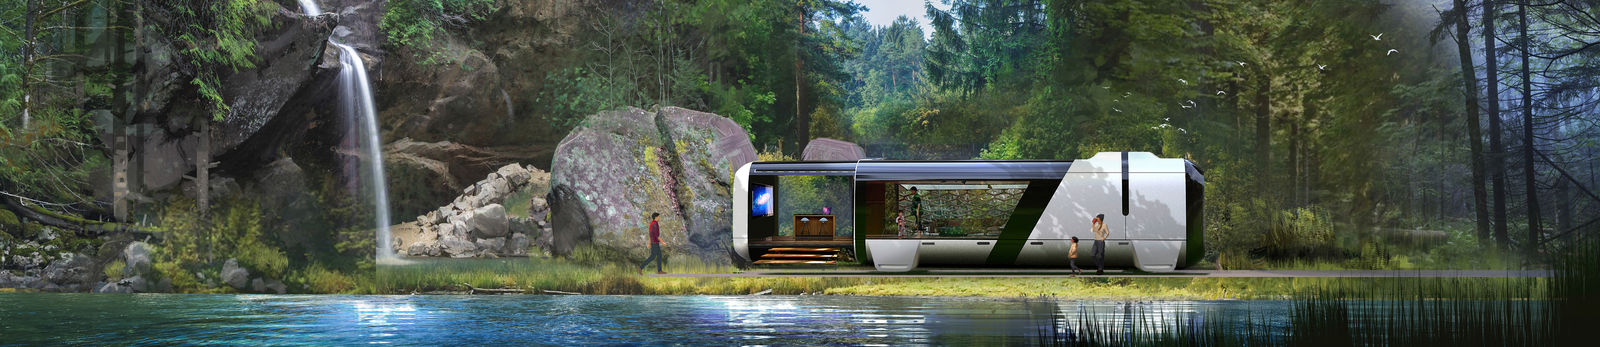 GenUrban (concept): A fully autonomous private cabin for four to five people to move around in urban surroundings